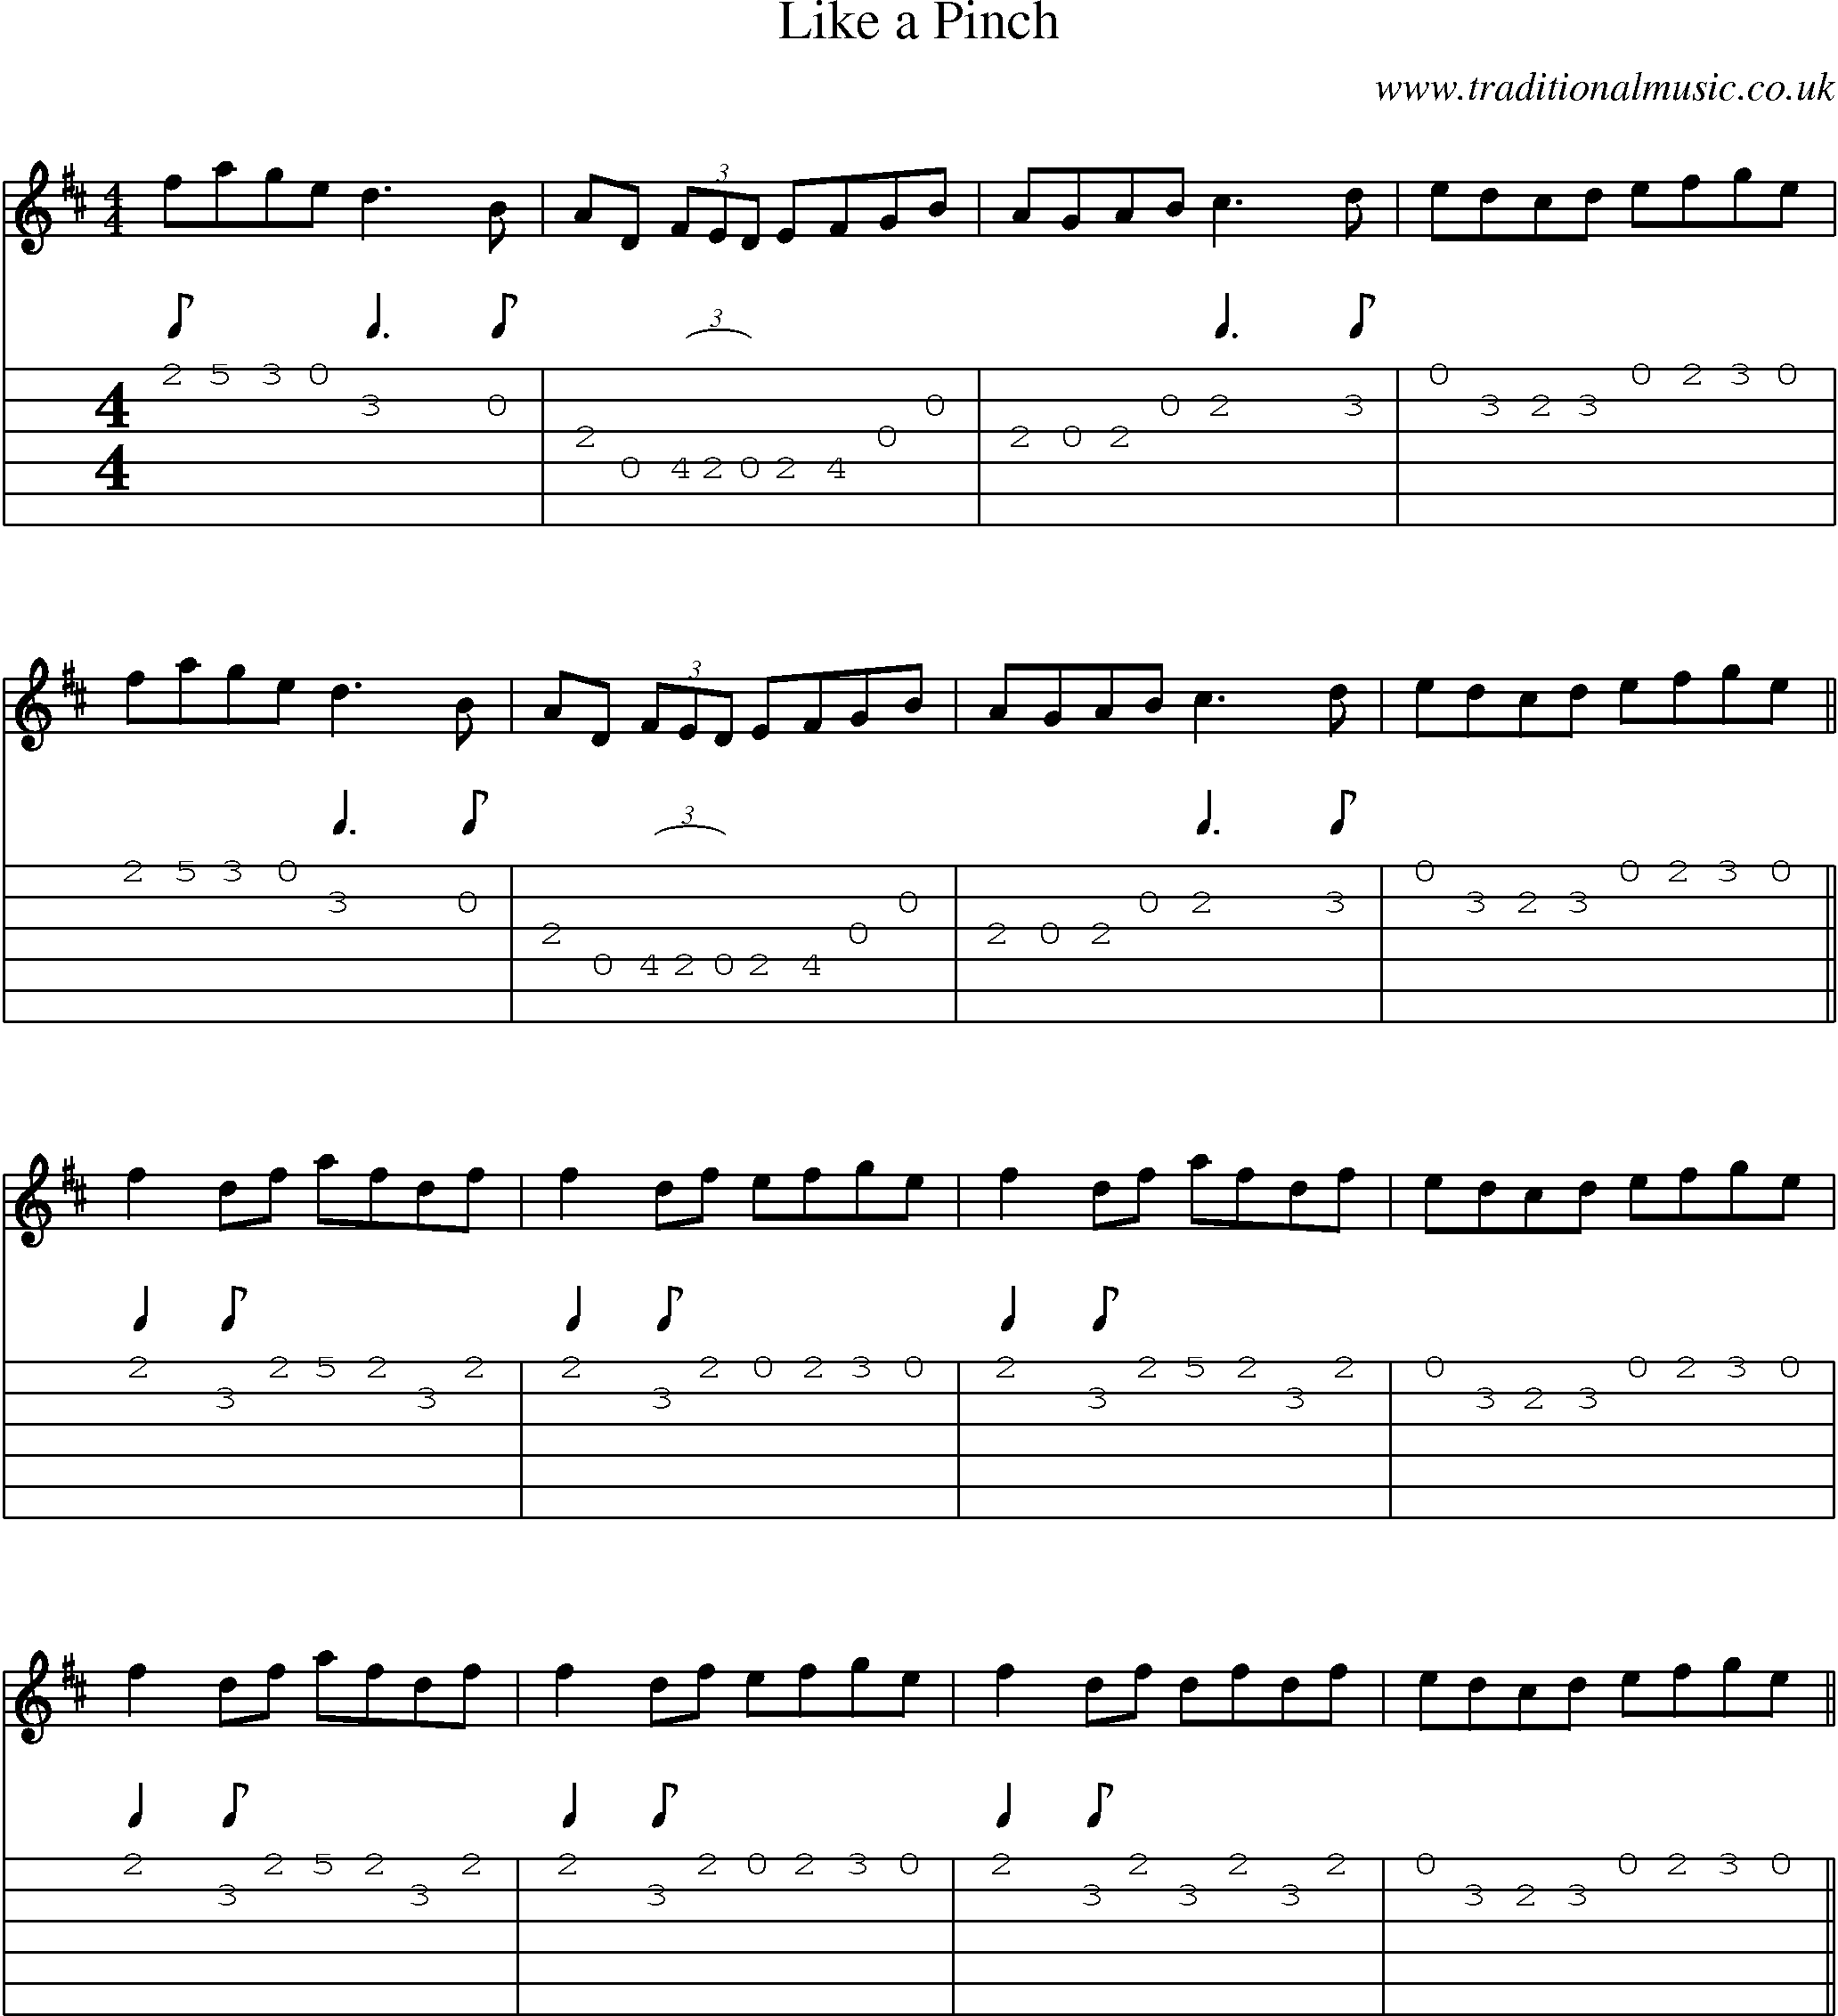 Music Score and Guitar Tabs for Like A Pinch